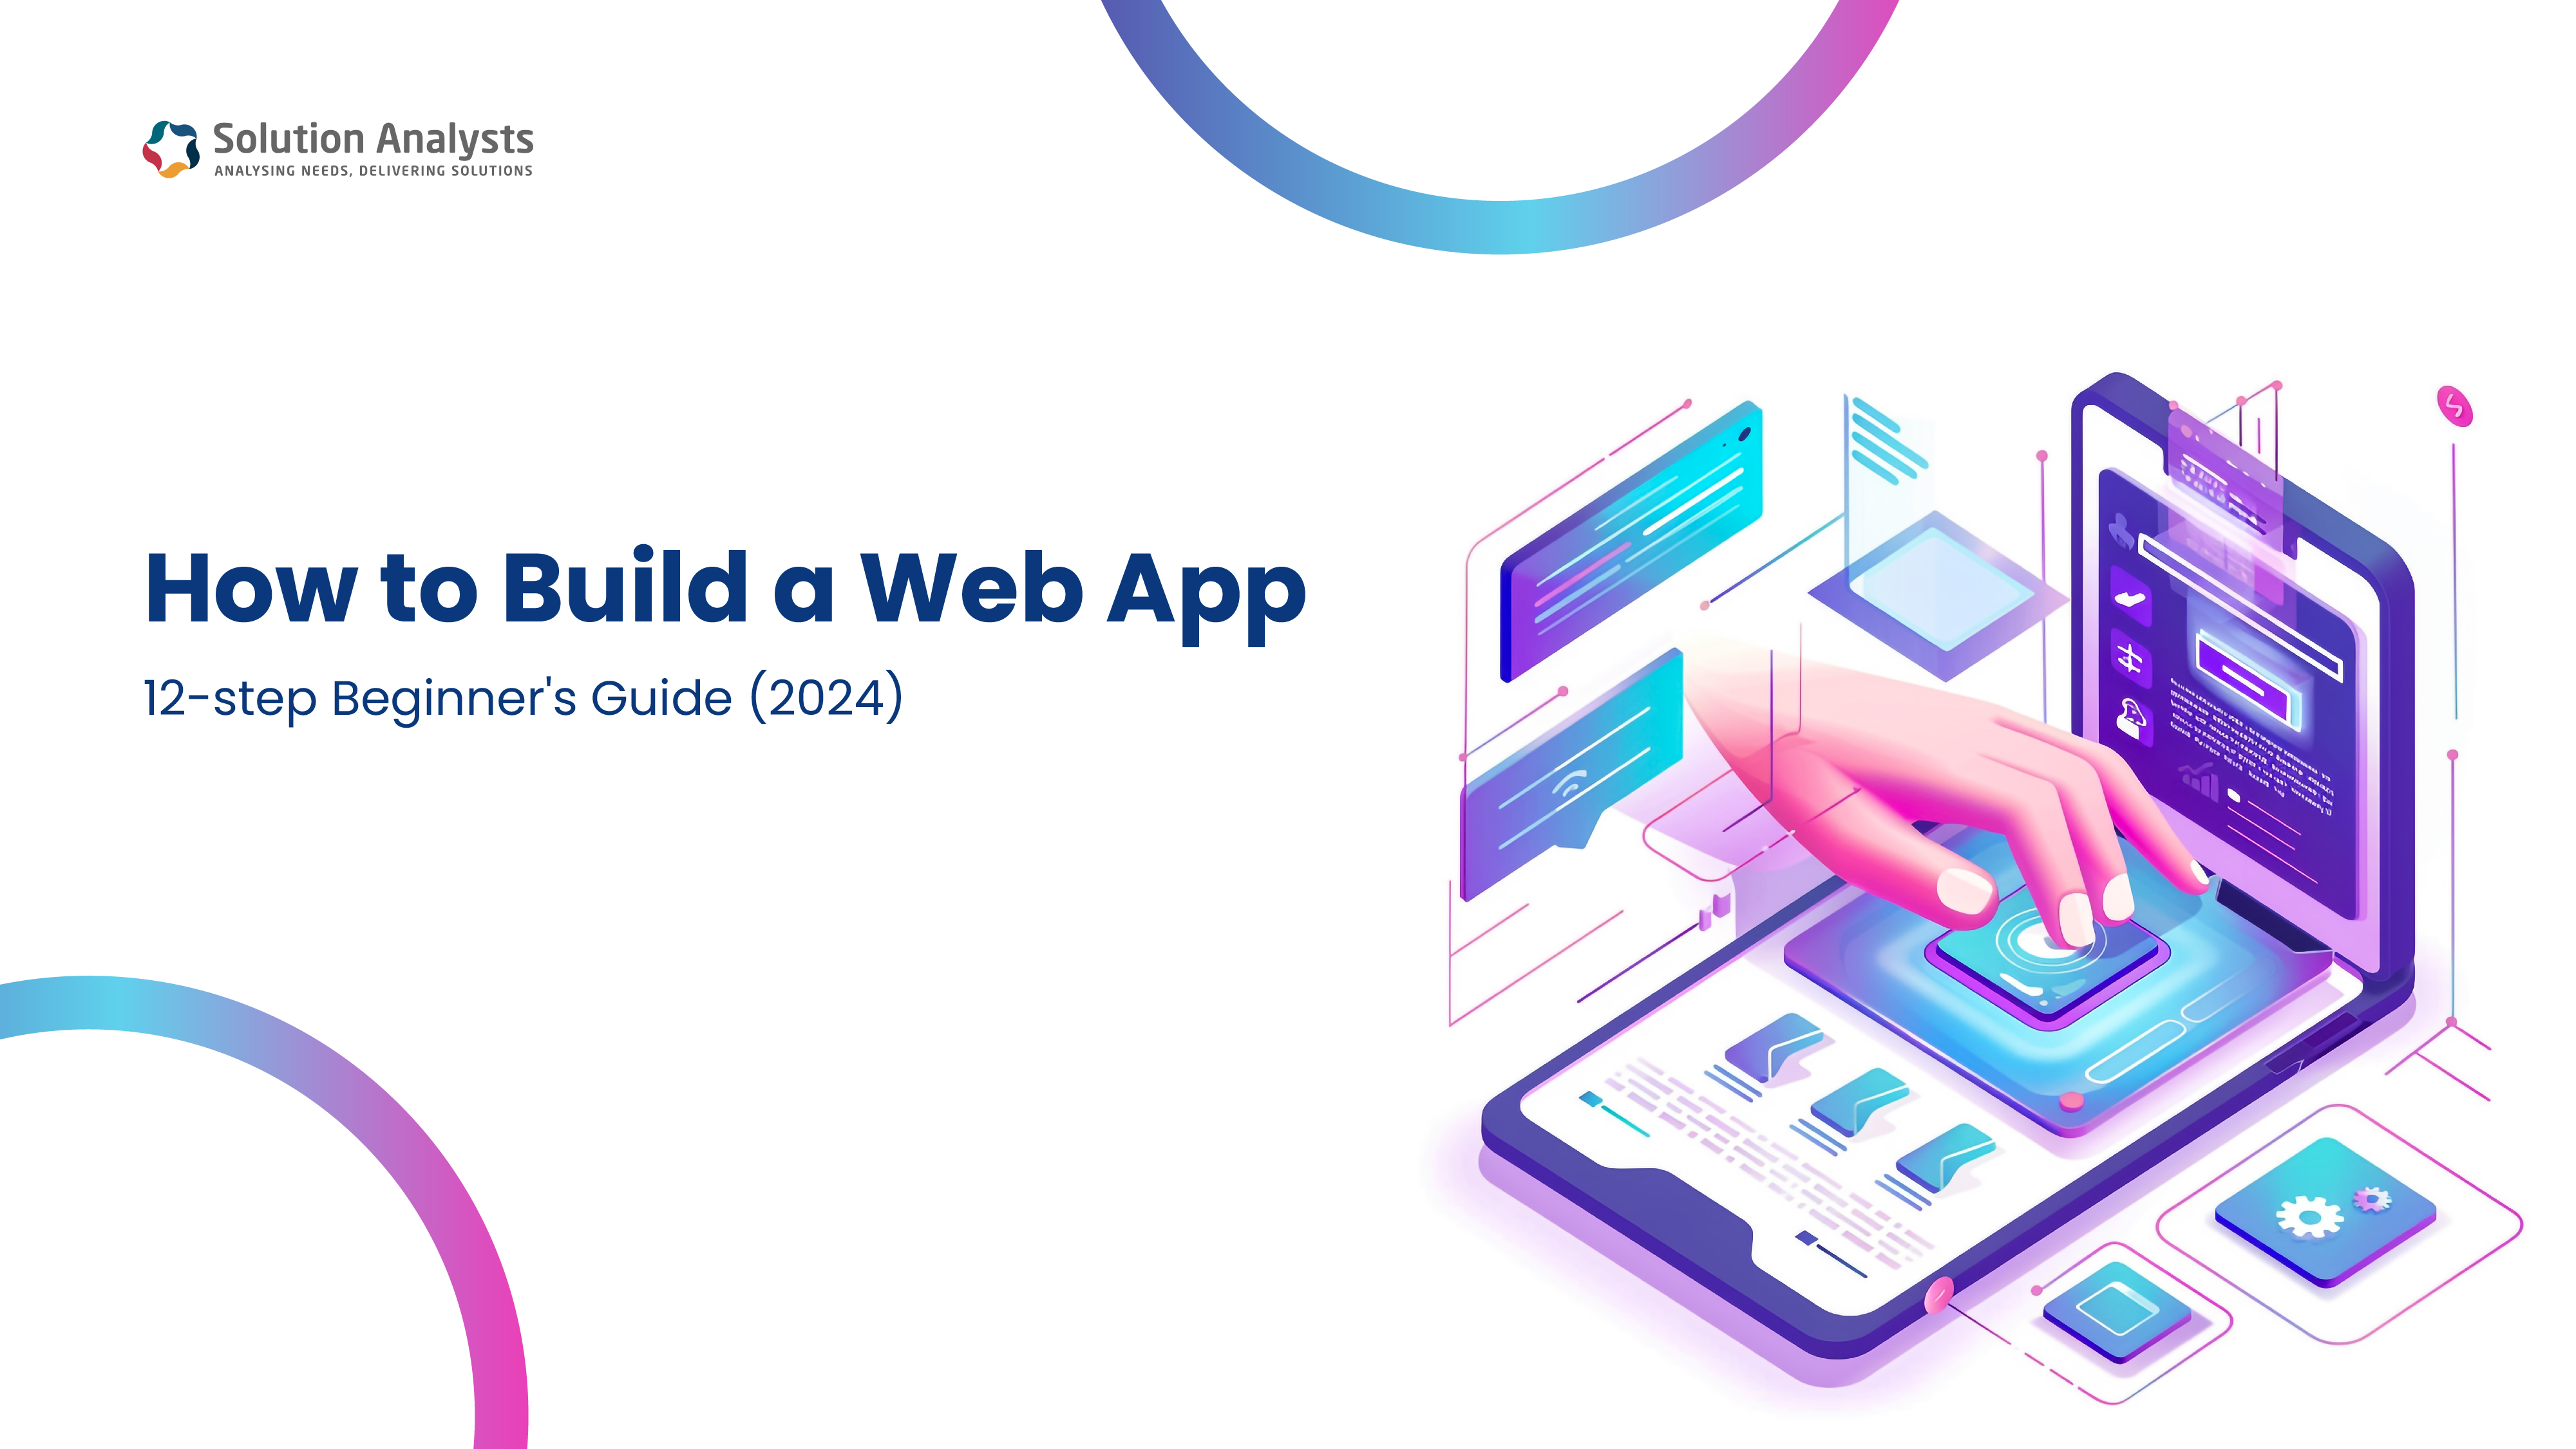 How to Build a Web App: 12-step Beginner’s Guide (2024)